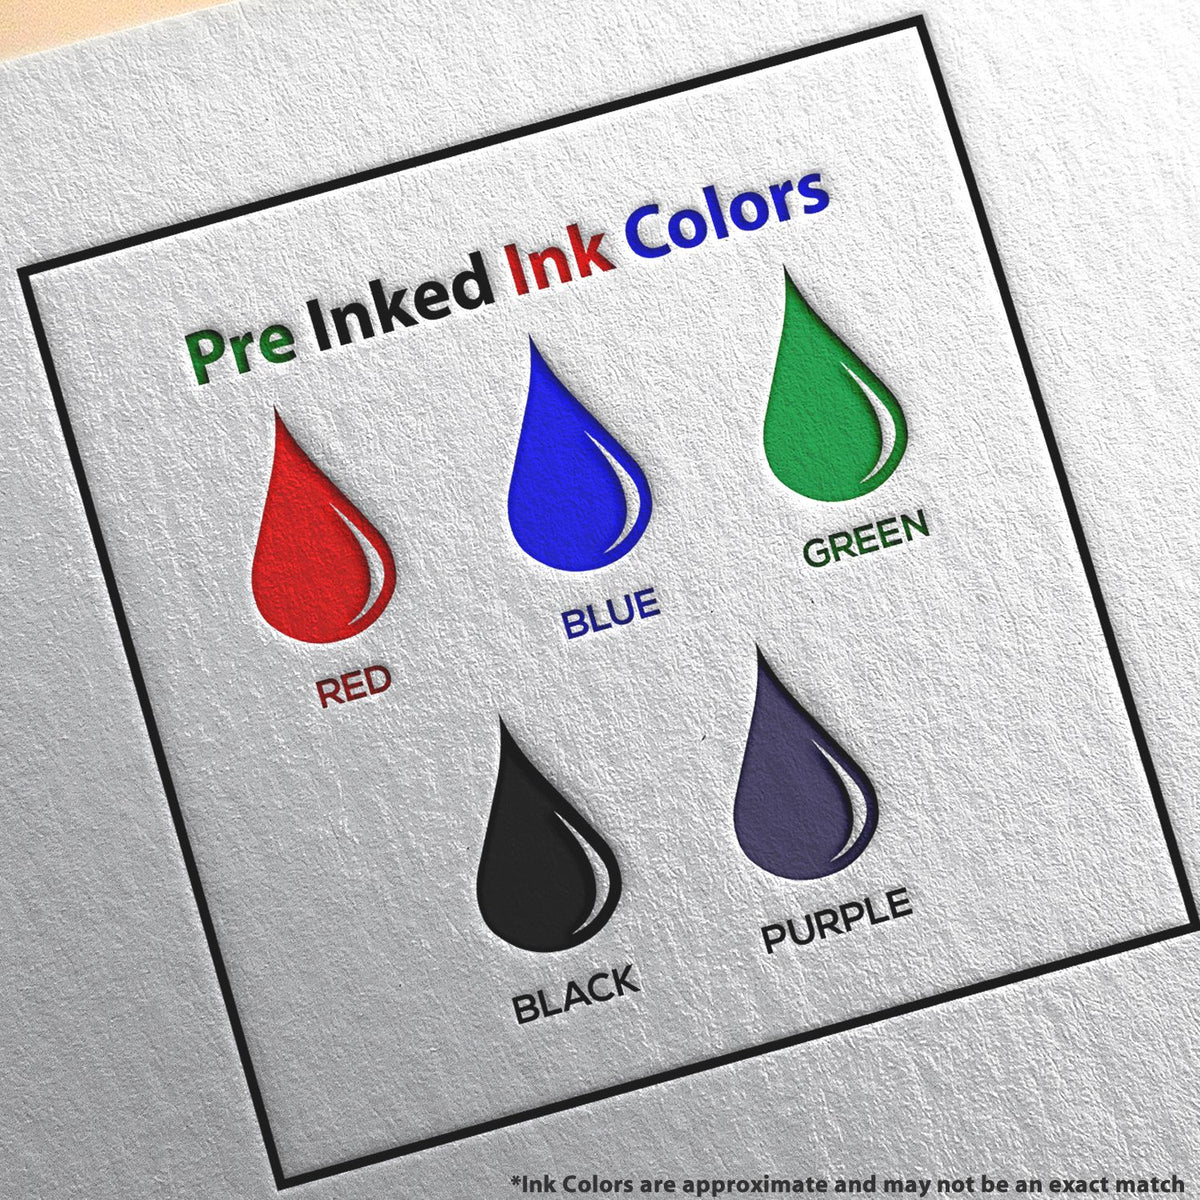 A picture showing the different ink colors or hues available for the Slim Pre-Inked West Virginia Professional Engineer Seal Stamp product.